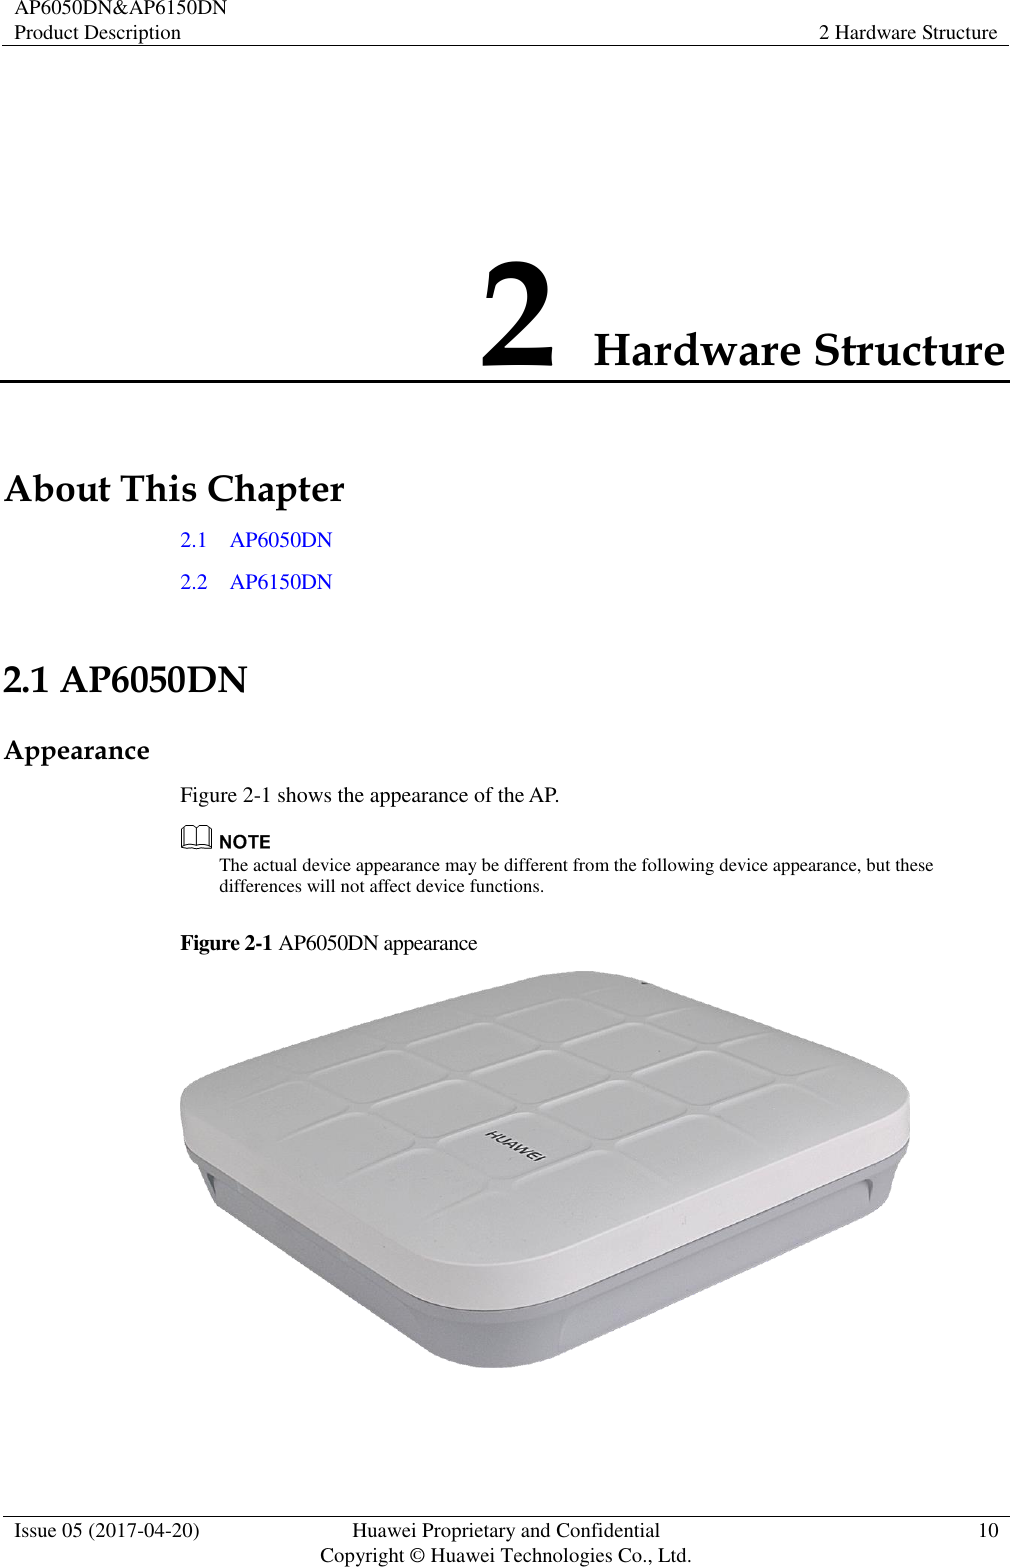 AP6050DN&amp;AP6150DN Product Description 2 Hardware Structure  Issue 05 (2017-04-20) Huawei Proprietary and Confidential                                     Copyright © Huawei Technologies Co., Ltd. 10  2 Hardware Structure About This Chapter 2.1    AP6050DN 2.2    AP6150DN 2.1 AP6050DN Appearance Figure 2-1 shows the appearance of the AP.  The actual device appearance may be different from the following device appearance, but these differences will not affect device functions. Figure 2-1 AP6050DN appearance   